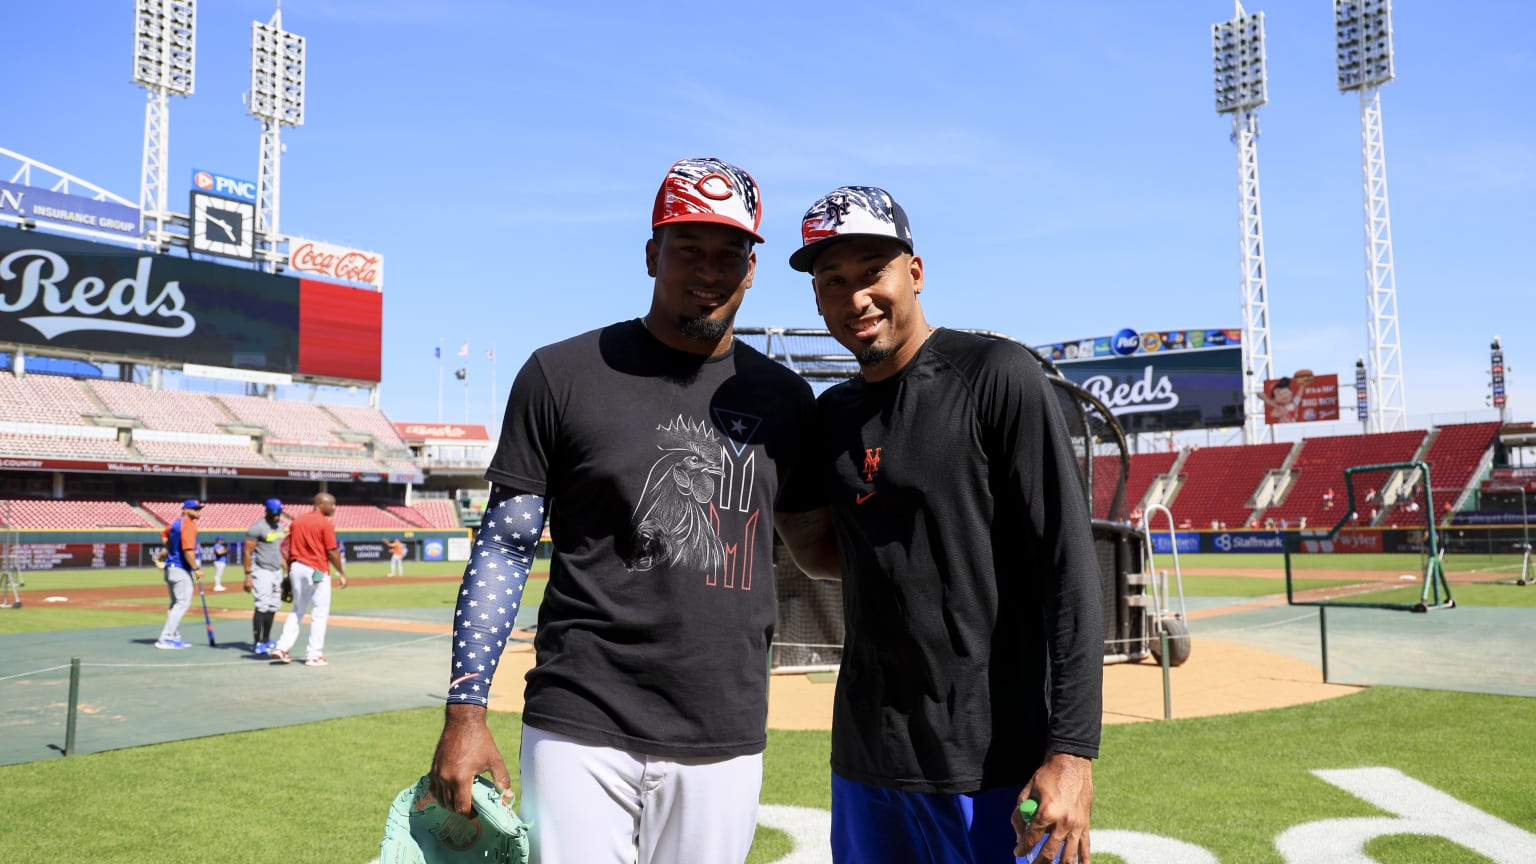 Alexis and Edwin Díaz pose for a photo together behind home plate